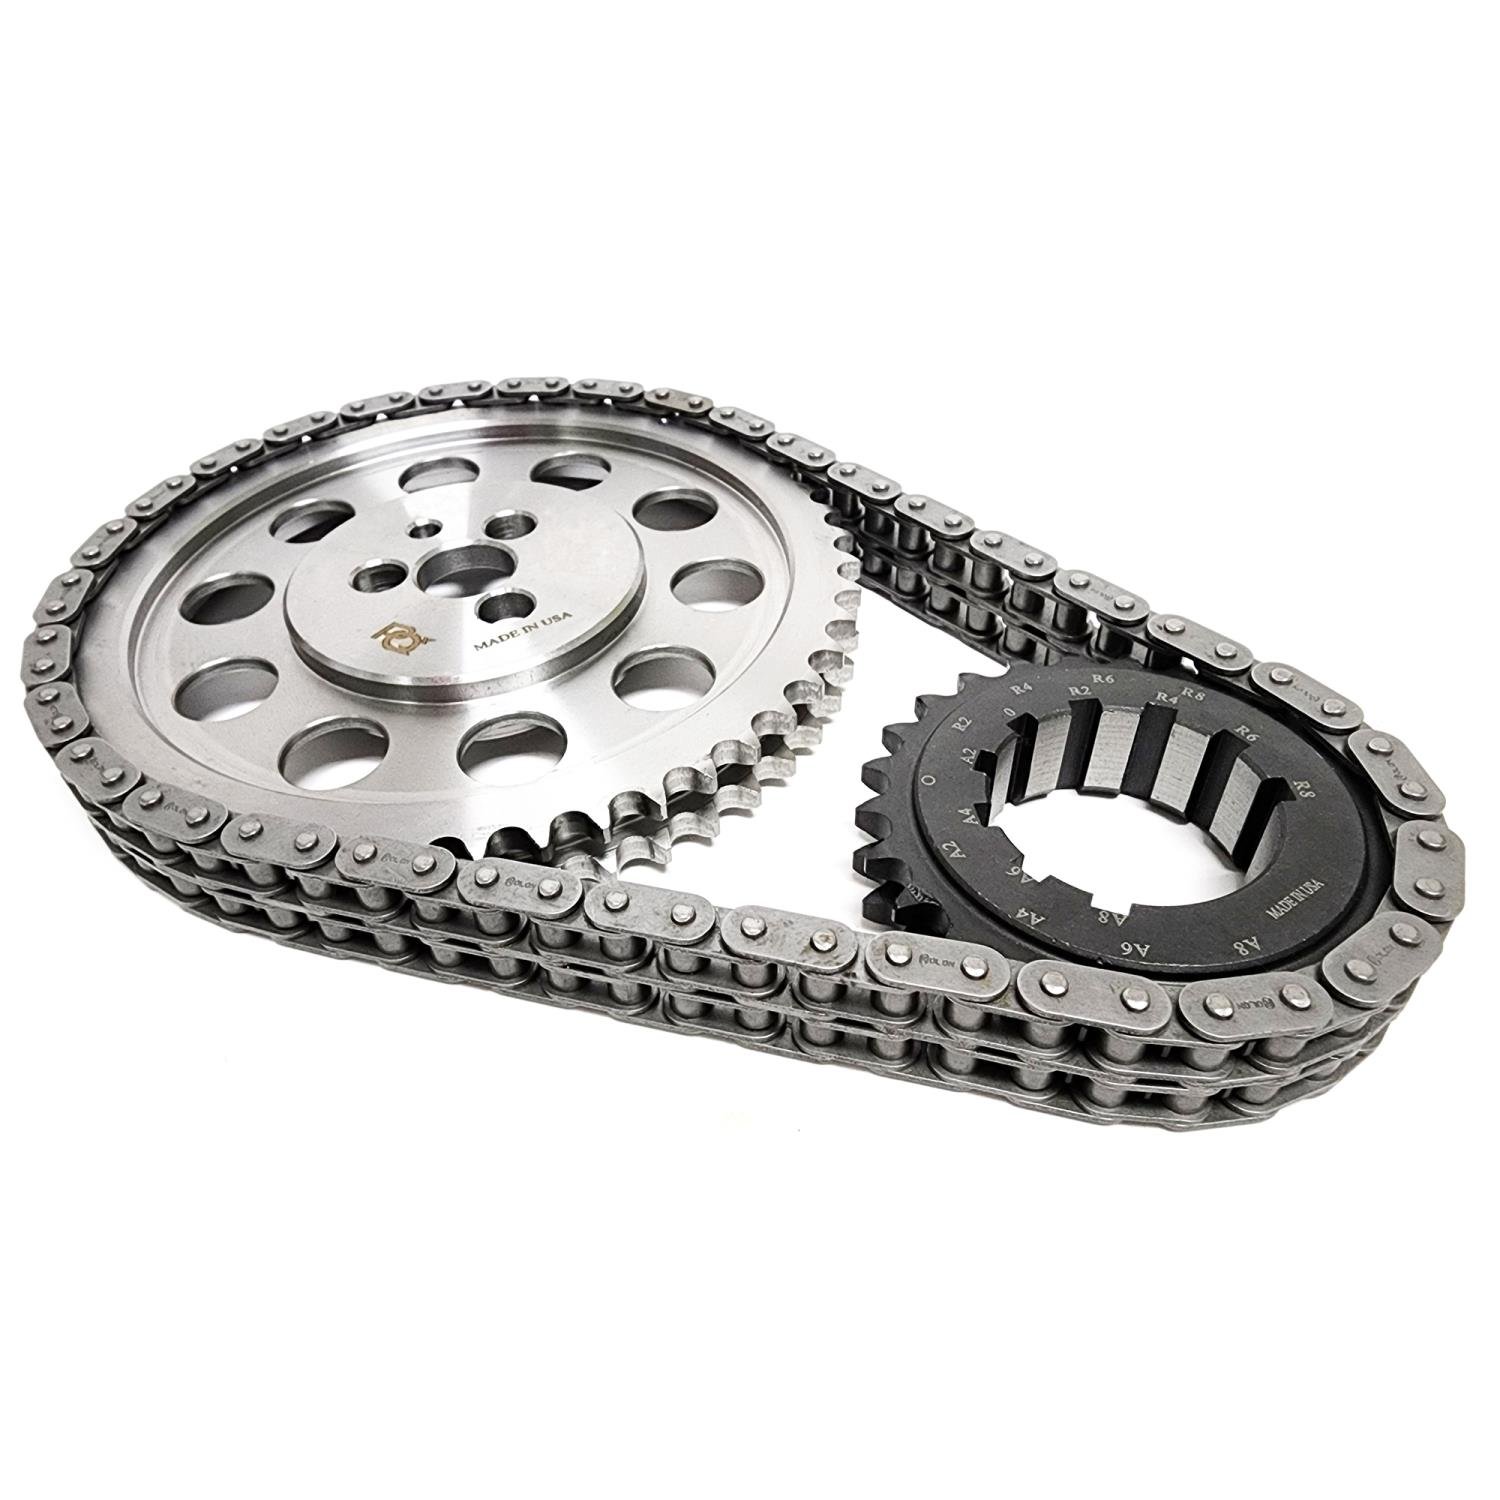 Double-Roller Timing Chain and Gear Set for Mopar 383/400/413/426/440 V8